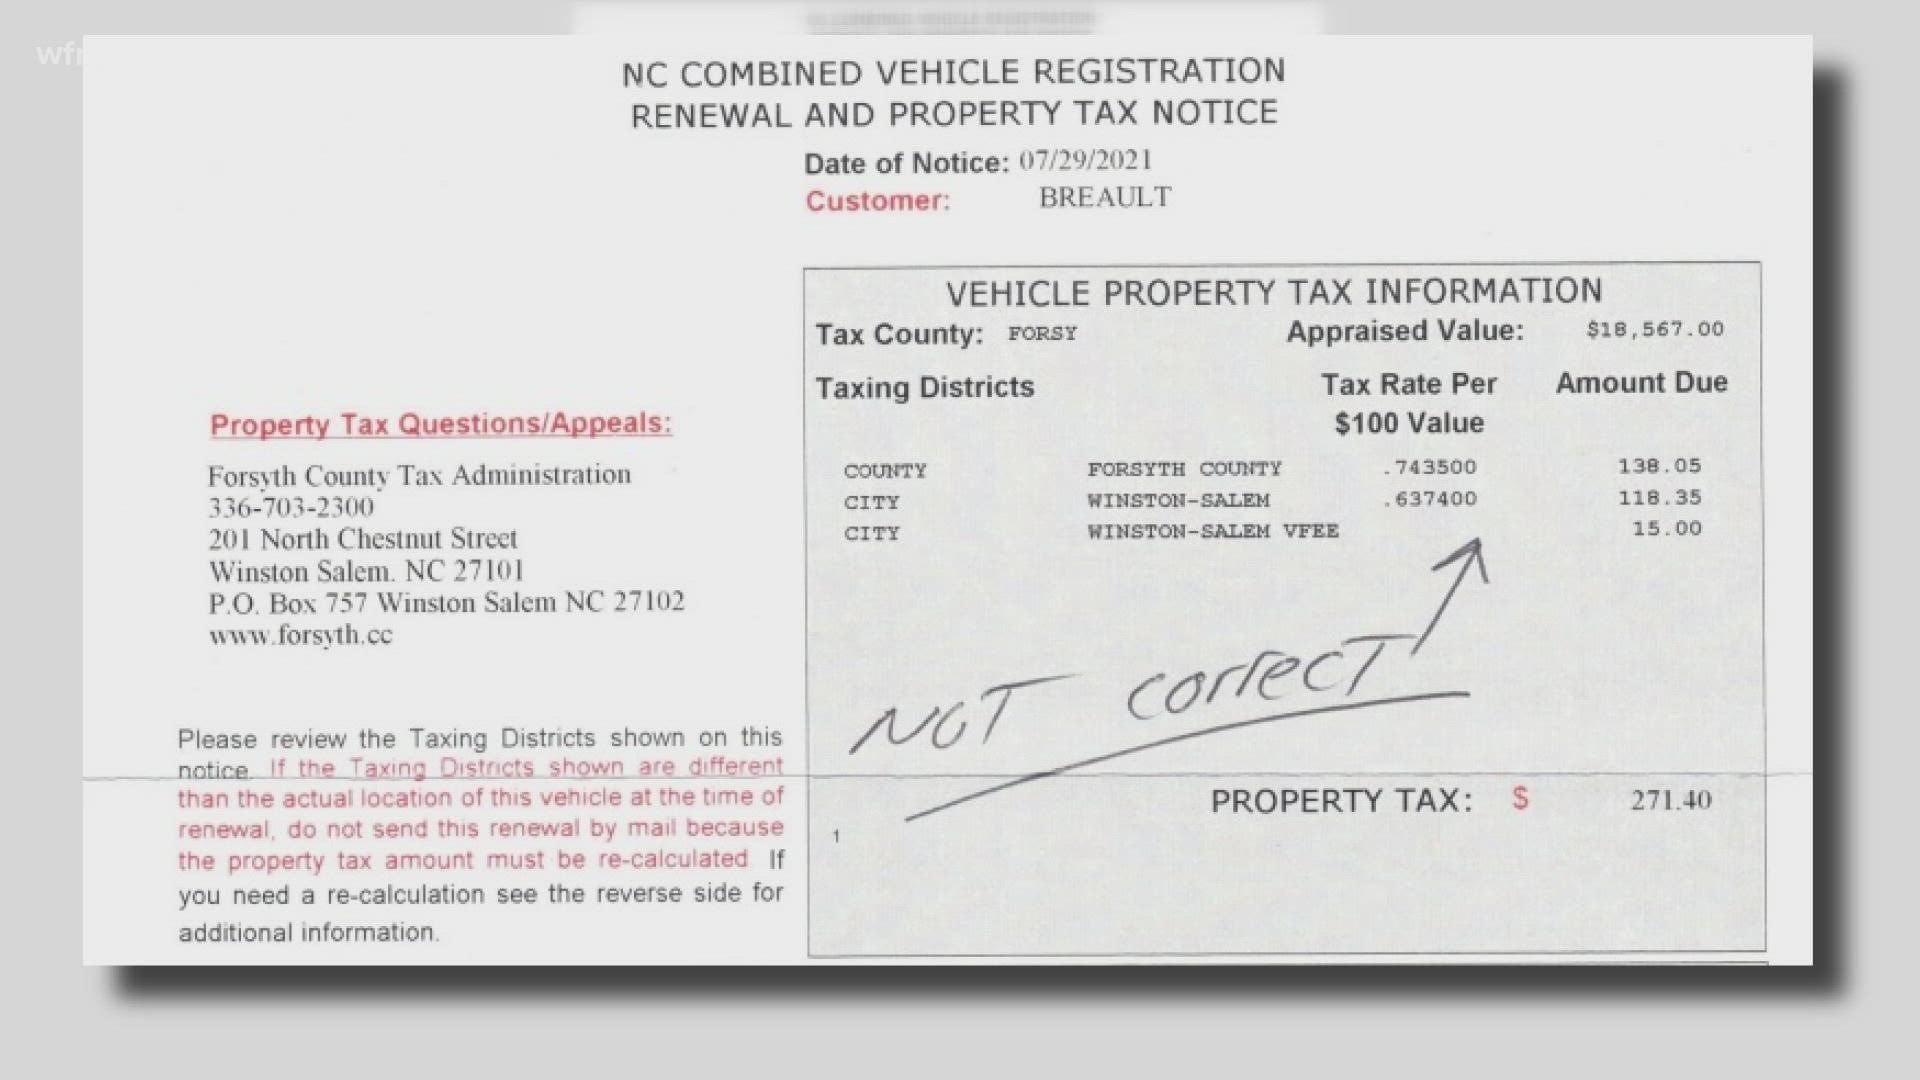 A Triad man discovered he and his neighbors were being overcharged on their vehicle property taxes